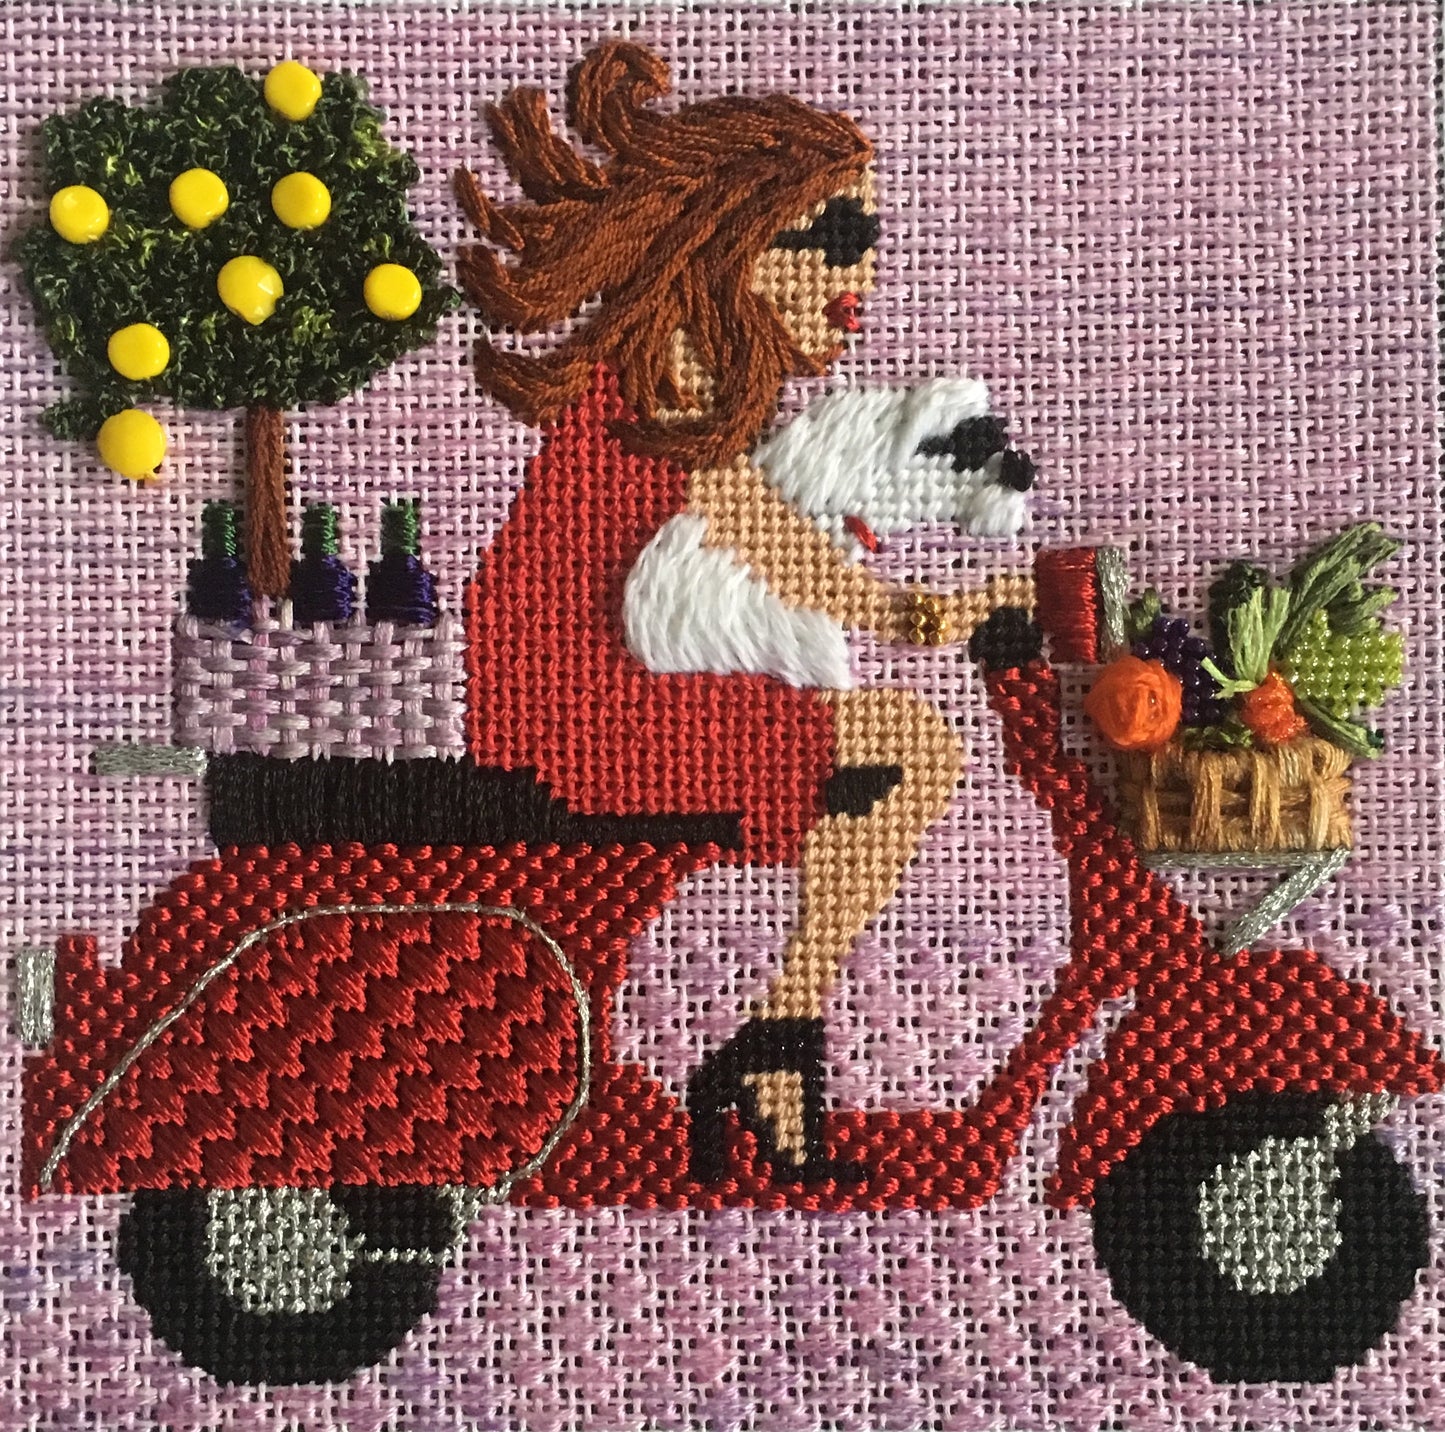 Stitched example of the Melissa Prince needlepoint canvas of a woman riding a Vespa motor scooter with a dog and wine and lemon trees in the background